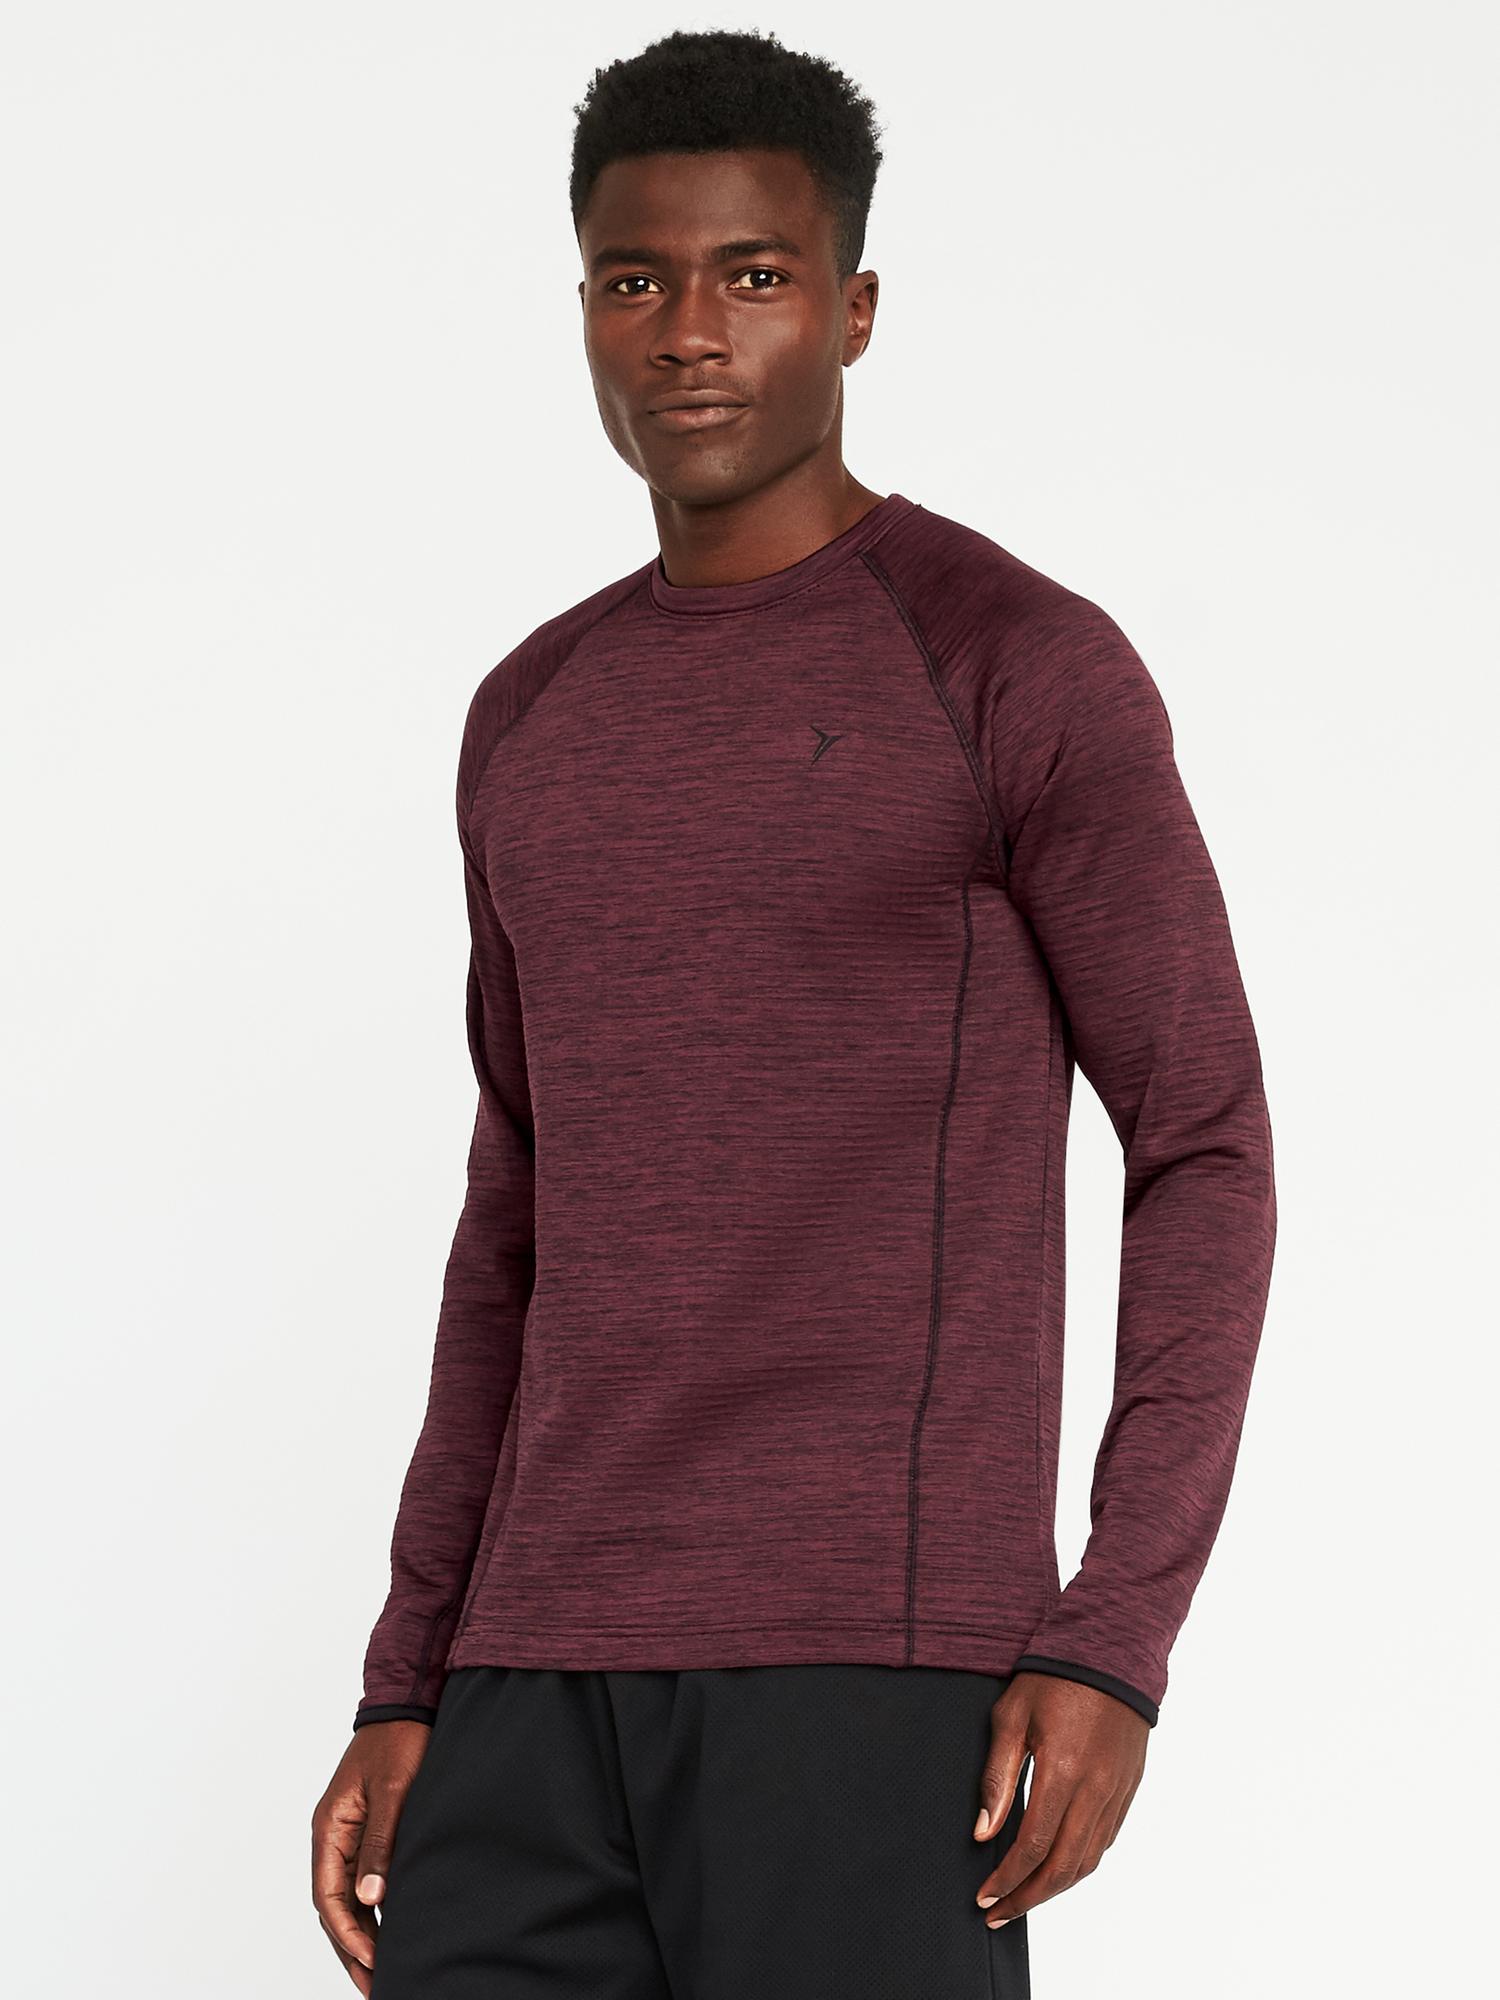 Go-Warm Thermal Performance Top for Men | Old Navy